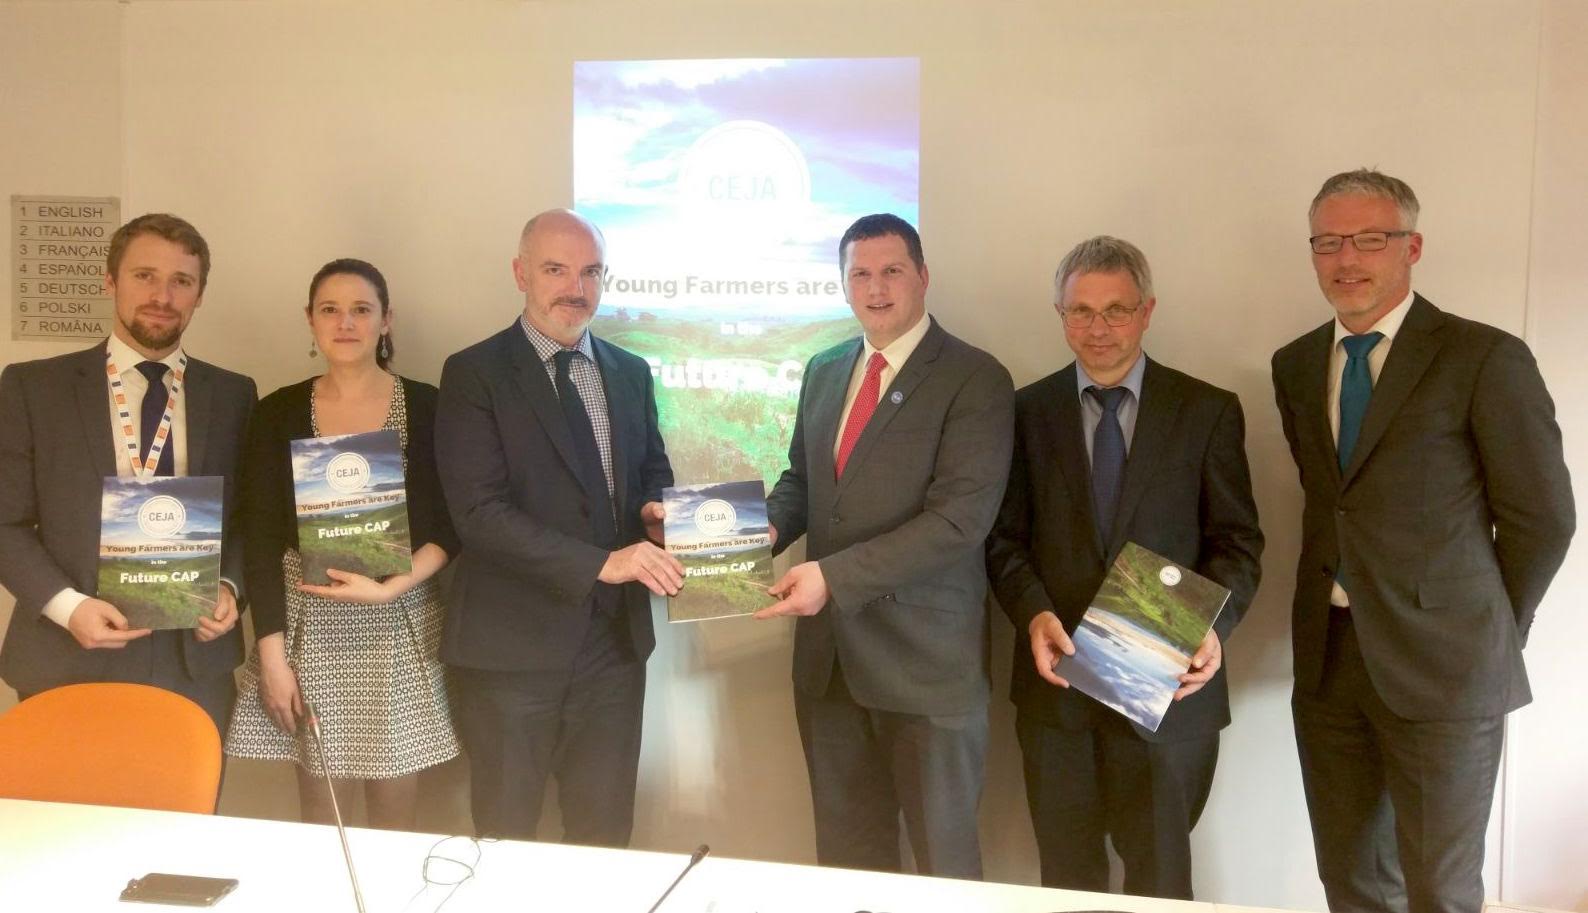 Young farmers are key in the future CAP: CEJA officially launches their vision for the future